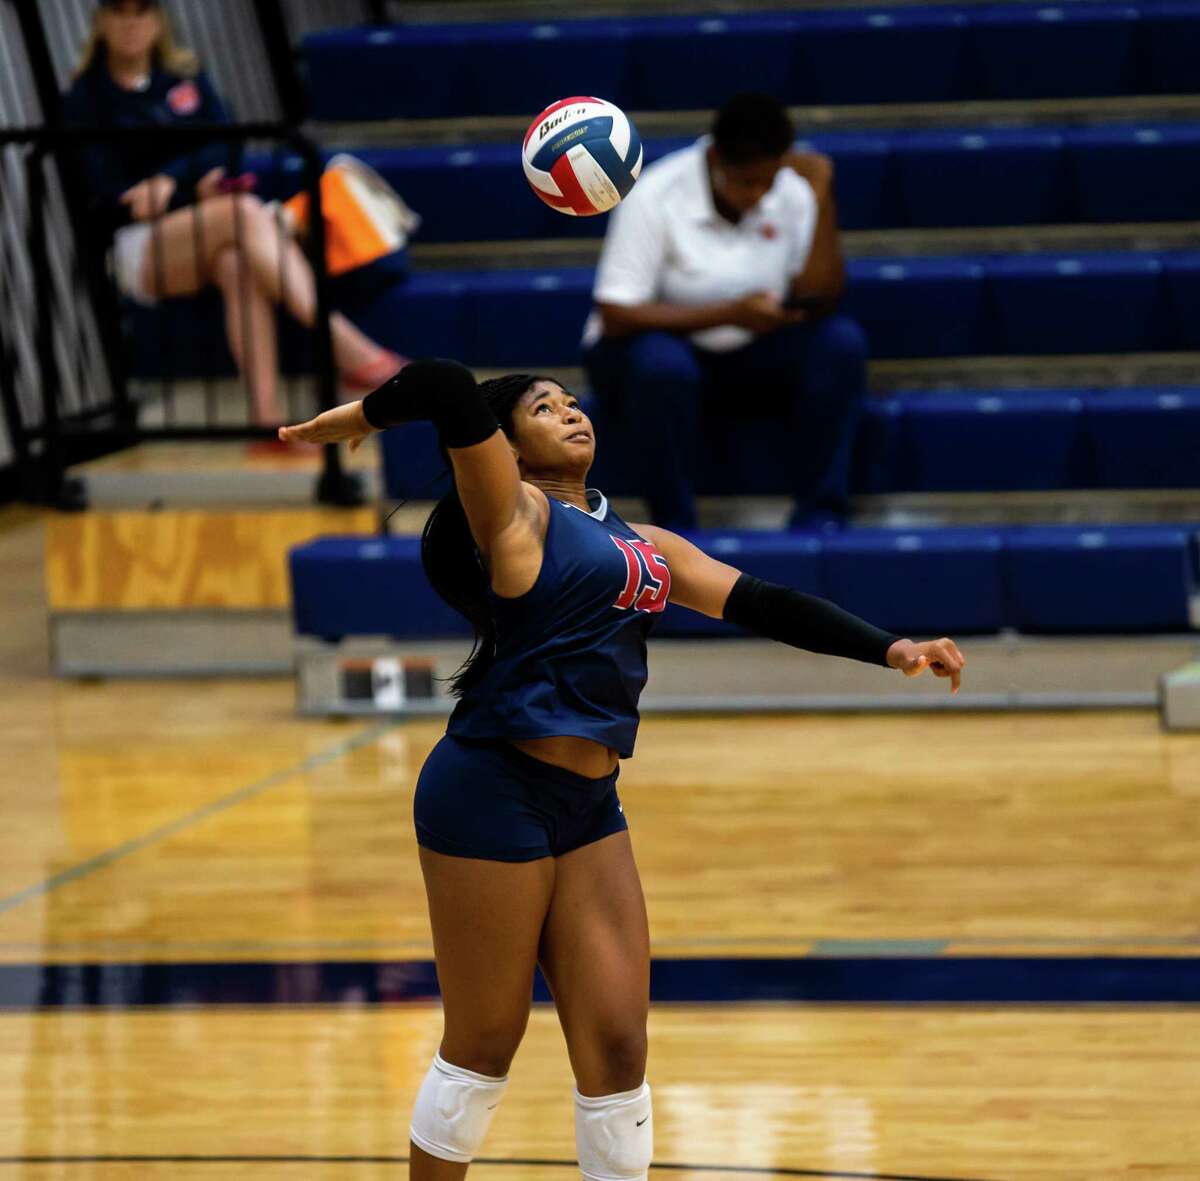 Tompkins' Tendai Titley had a solid all-around performance in a victory over Katy Taylor.